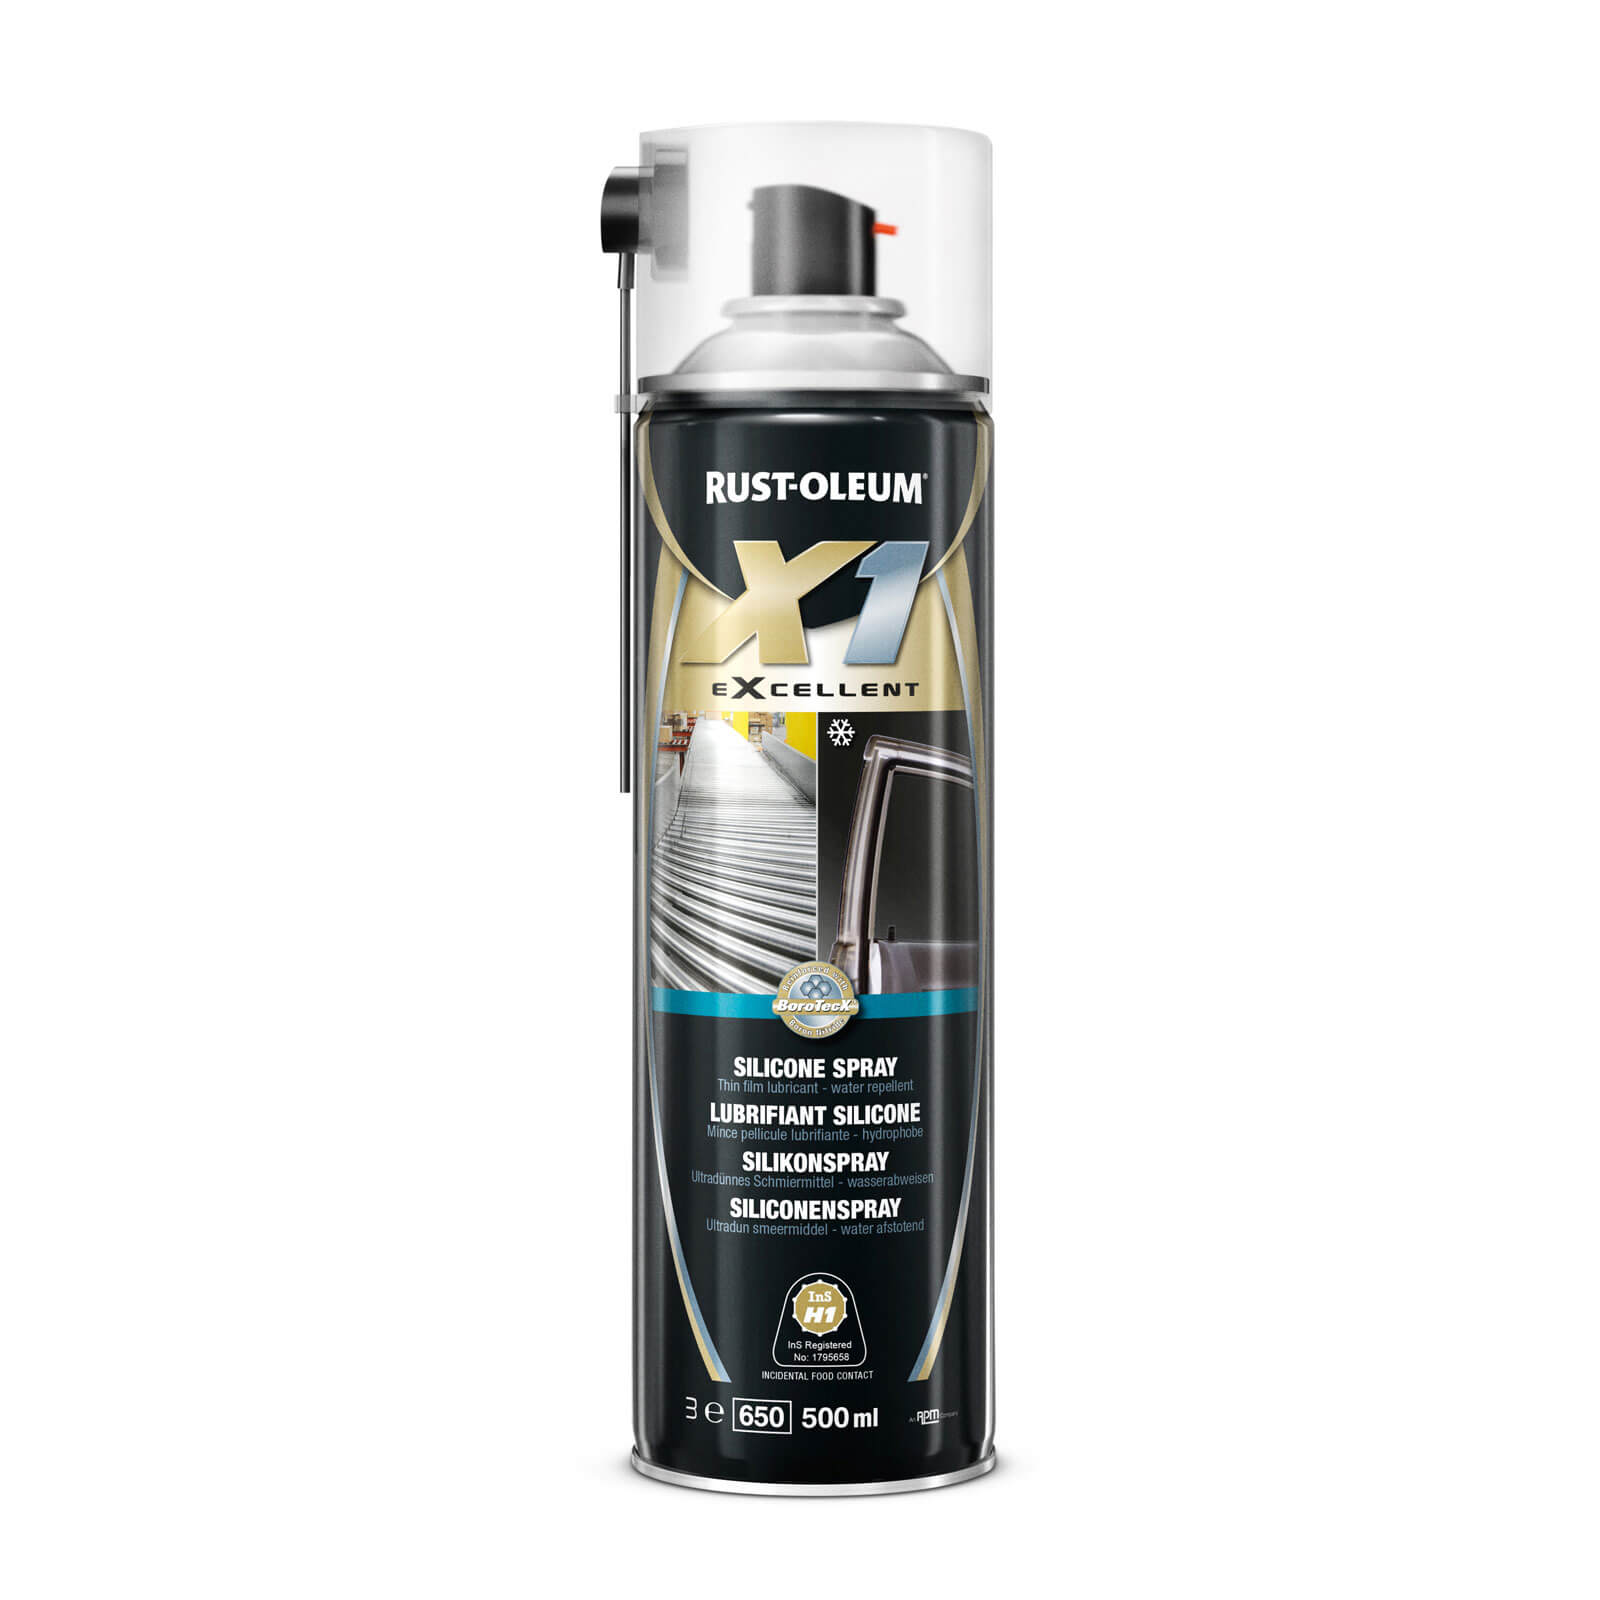 Image of Rust Oleum X1 eXcellent Silicone Lubricating Spray 500ml